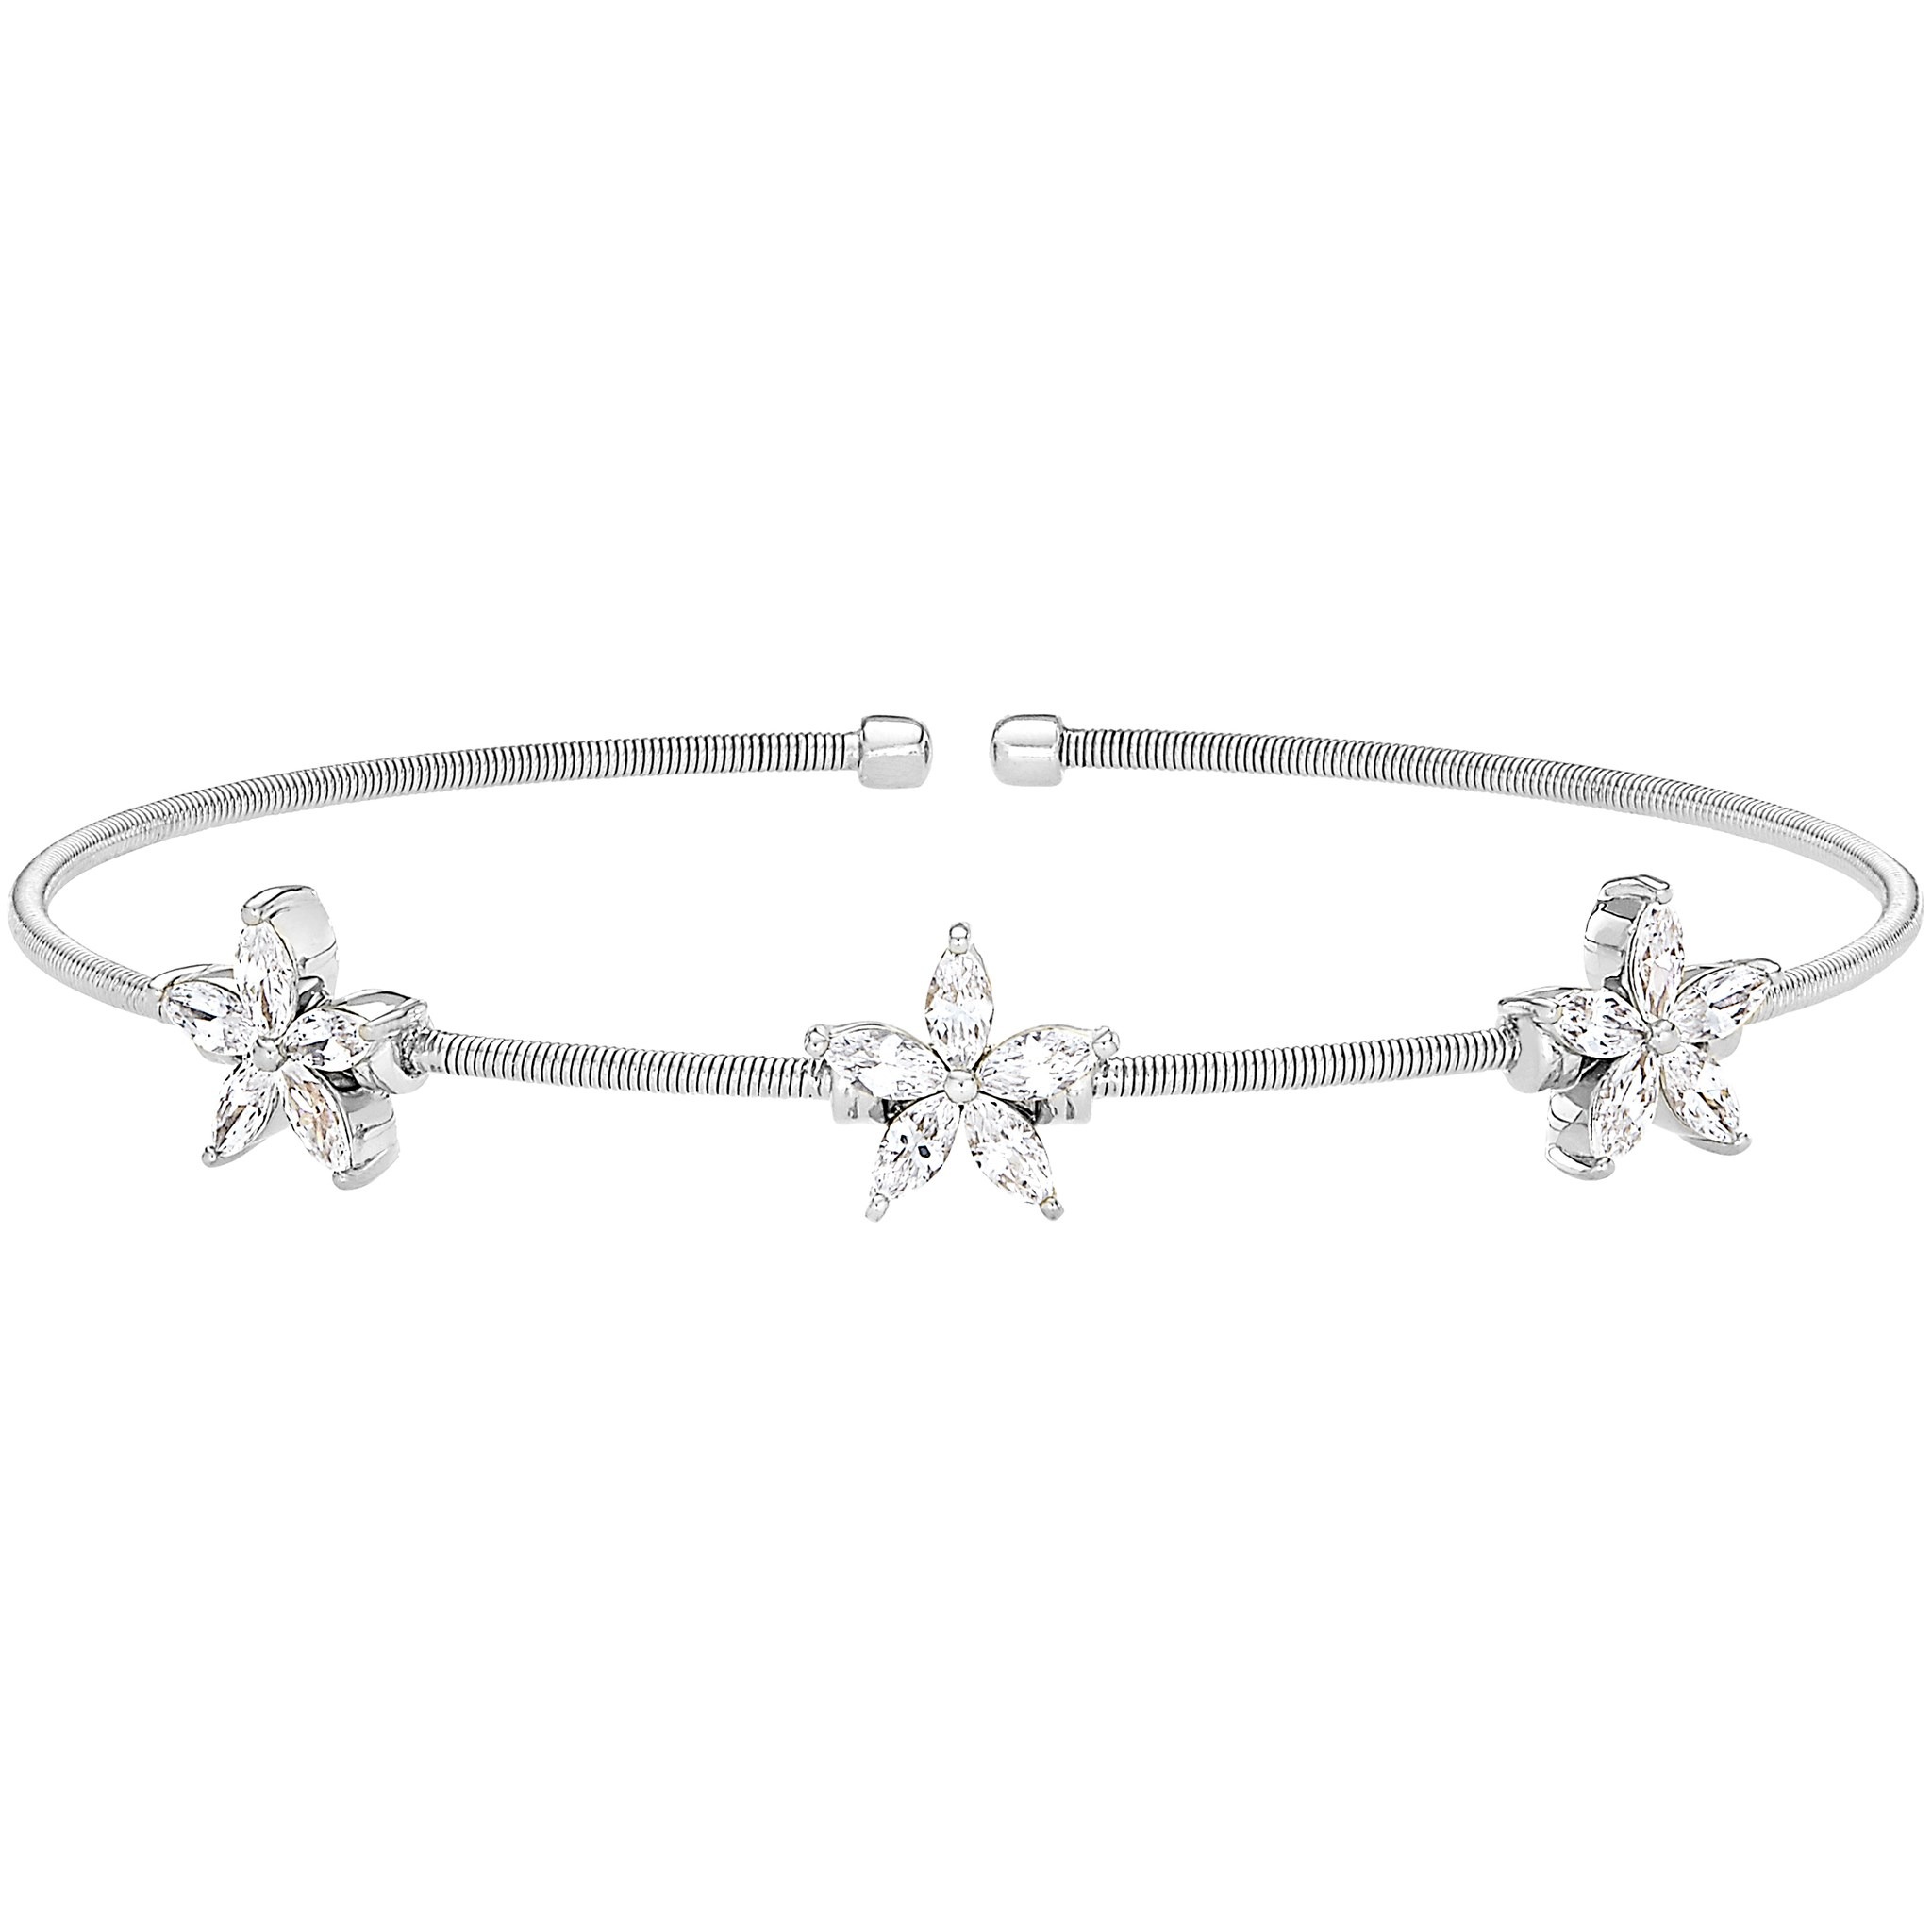 Rhodium Finish Sterling Silver Cable Cuff Bracelet with Flowers